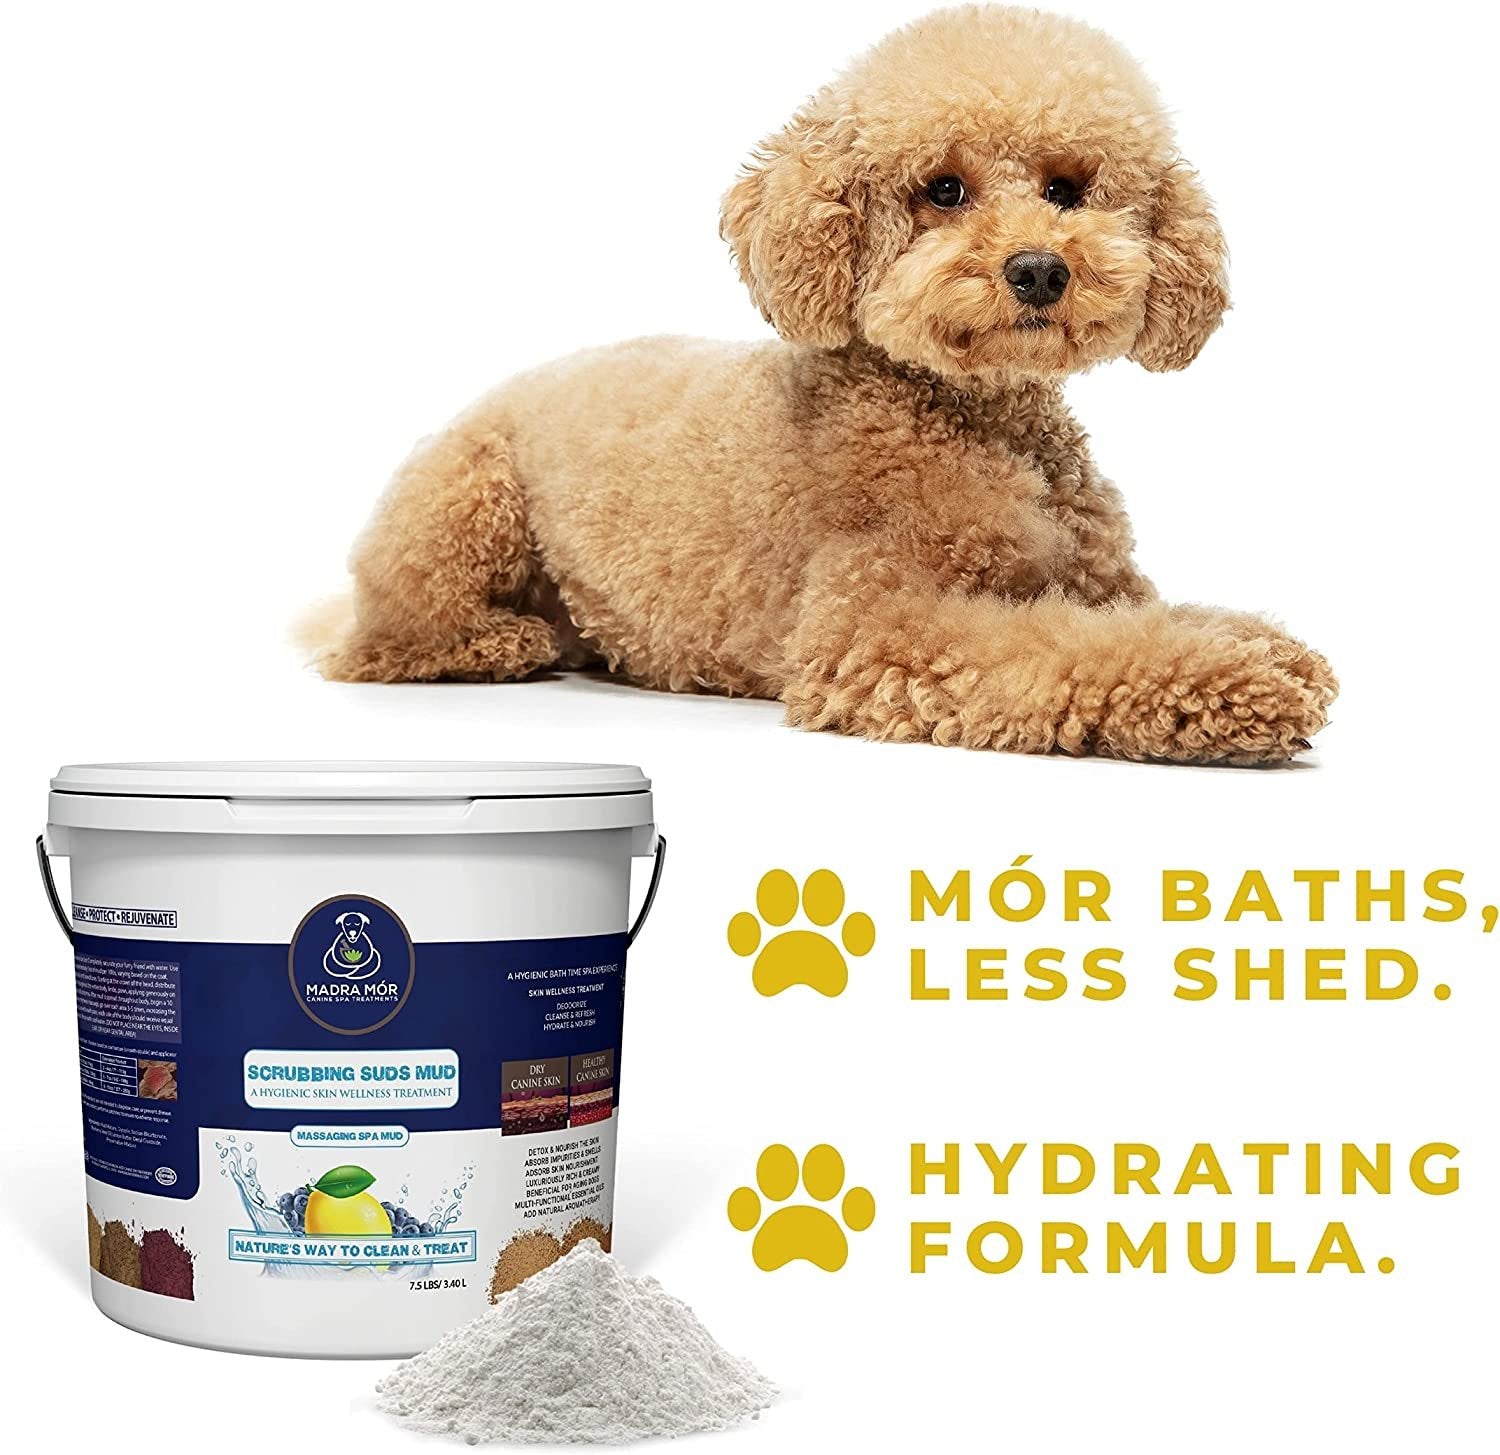 Madra Mor Scrubbing Suds Dog Essentials Spa Mud | Dog Bath for Dog Grooming | Dry Skin for Dogs Treatment | Dog Coat Skin Care Products | 7.5lb Pail w Worldwide Nutrition Multi Purpose Key Chain